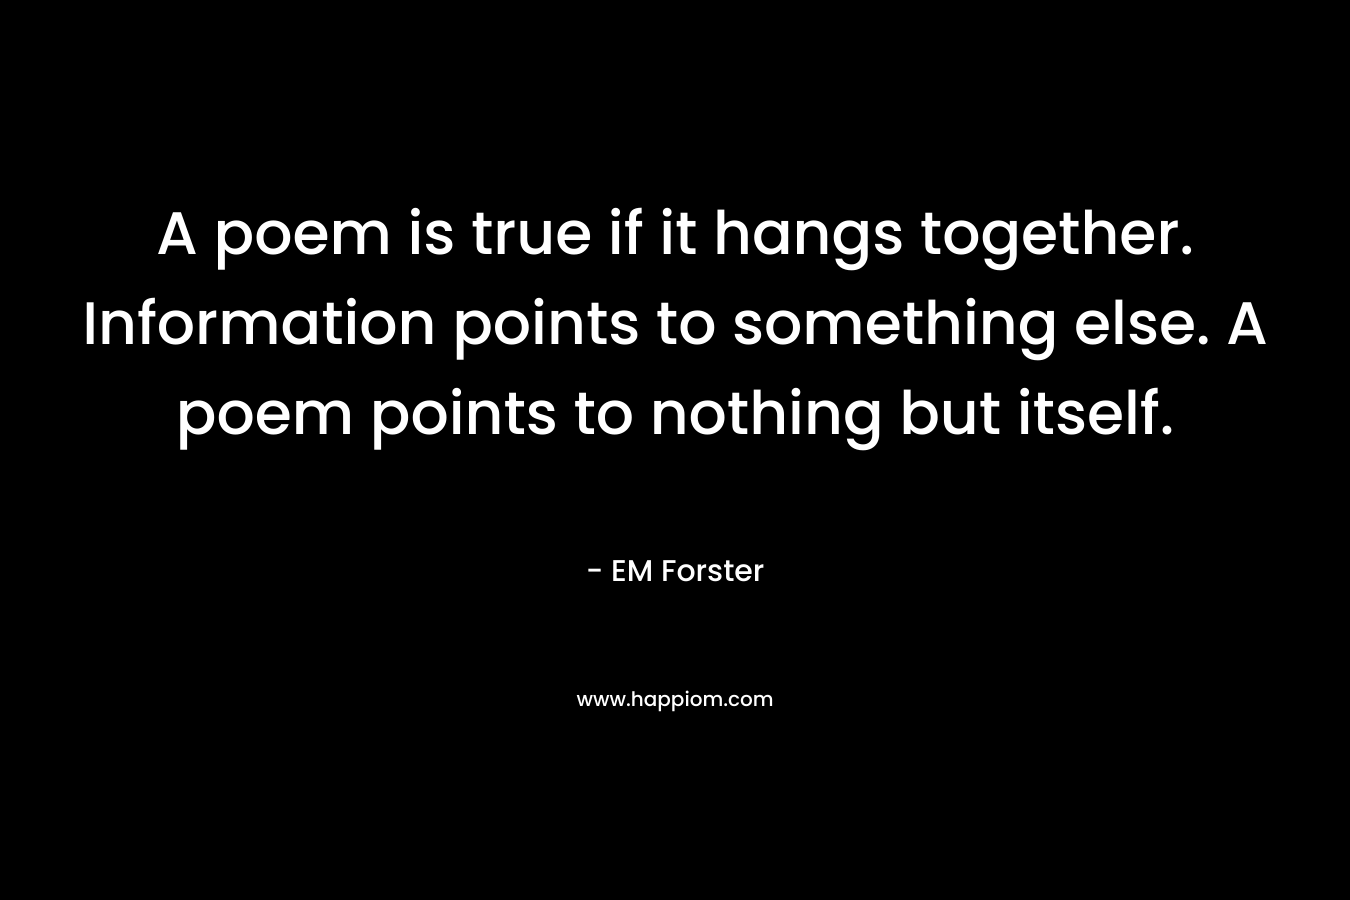 A poem is true if it hangs together. Information points to something else. A poem points to nothing but itself.  – EM Forster